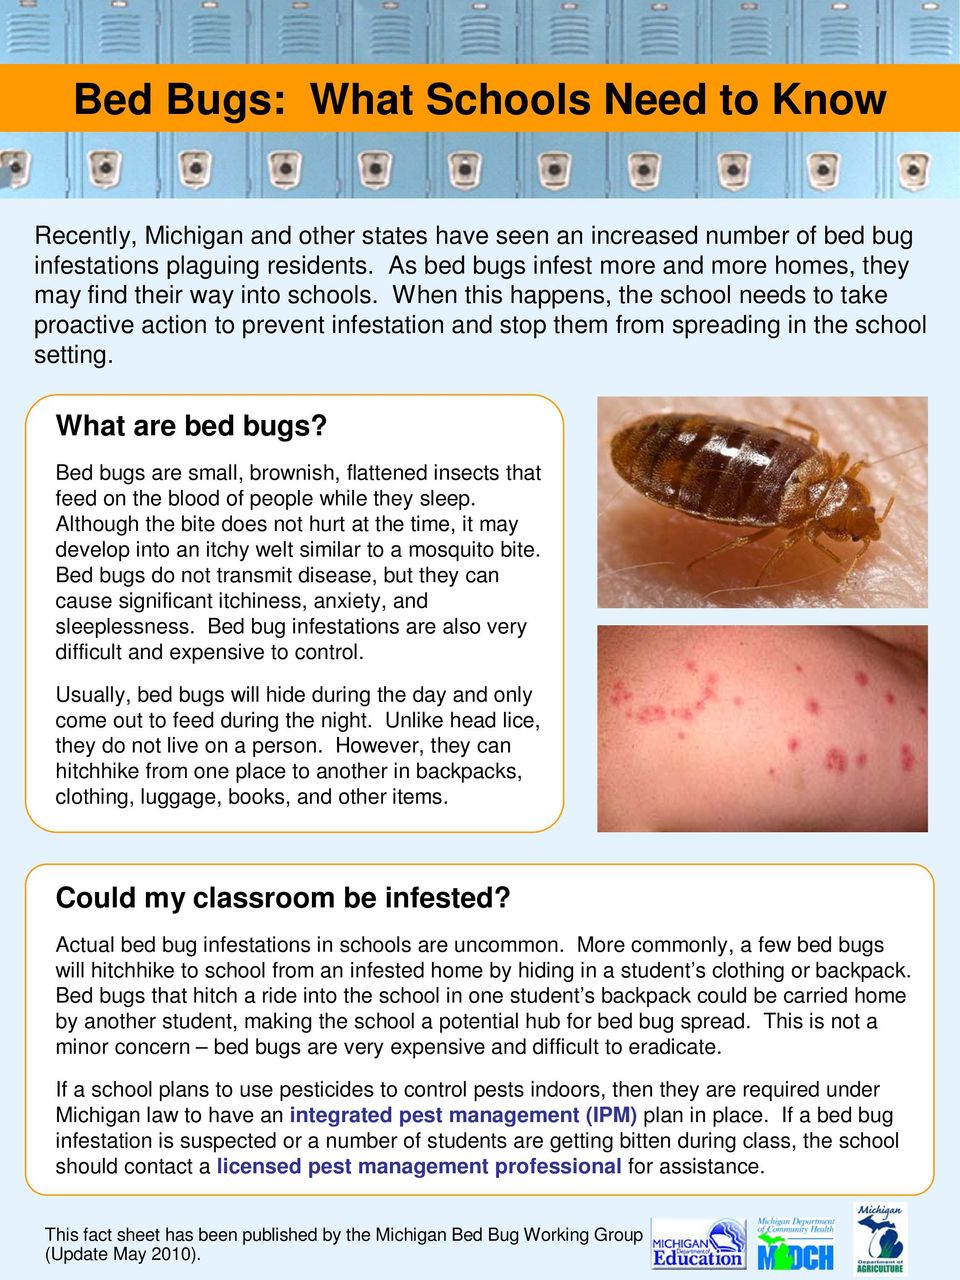 When this happens, the school needs to take proactive action to prevent infestation and stop them from spreading in the school setting. What are bed bugs?